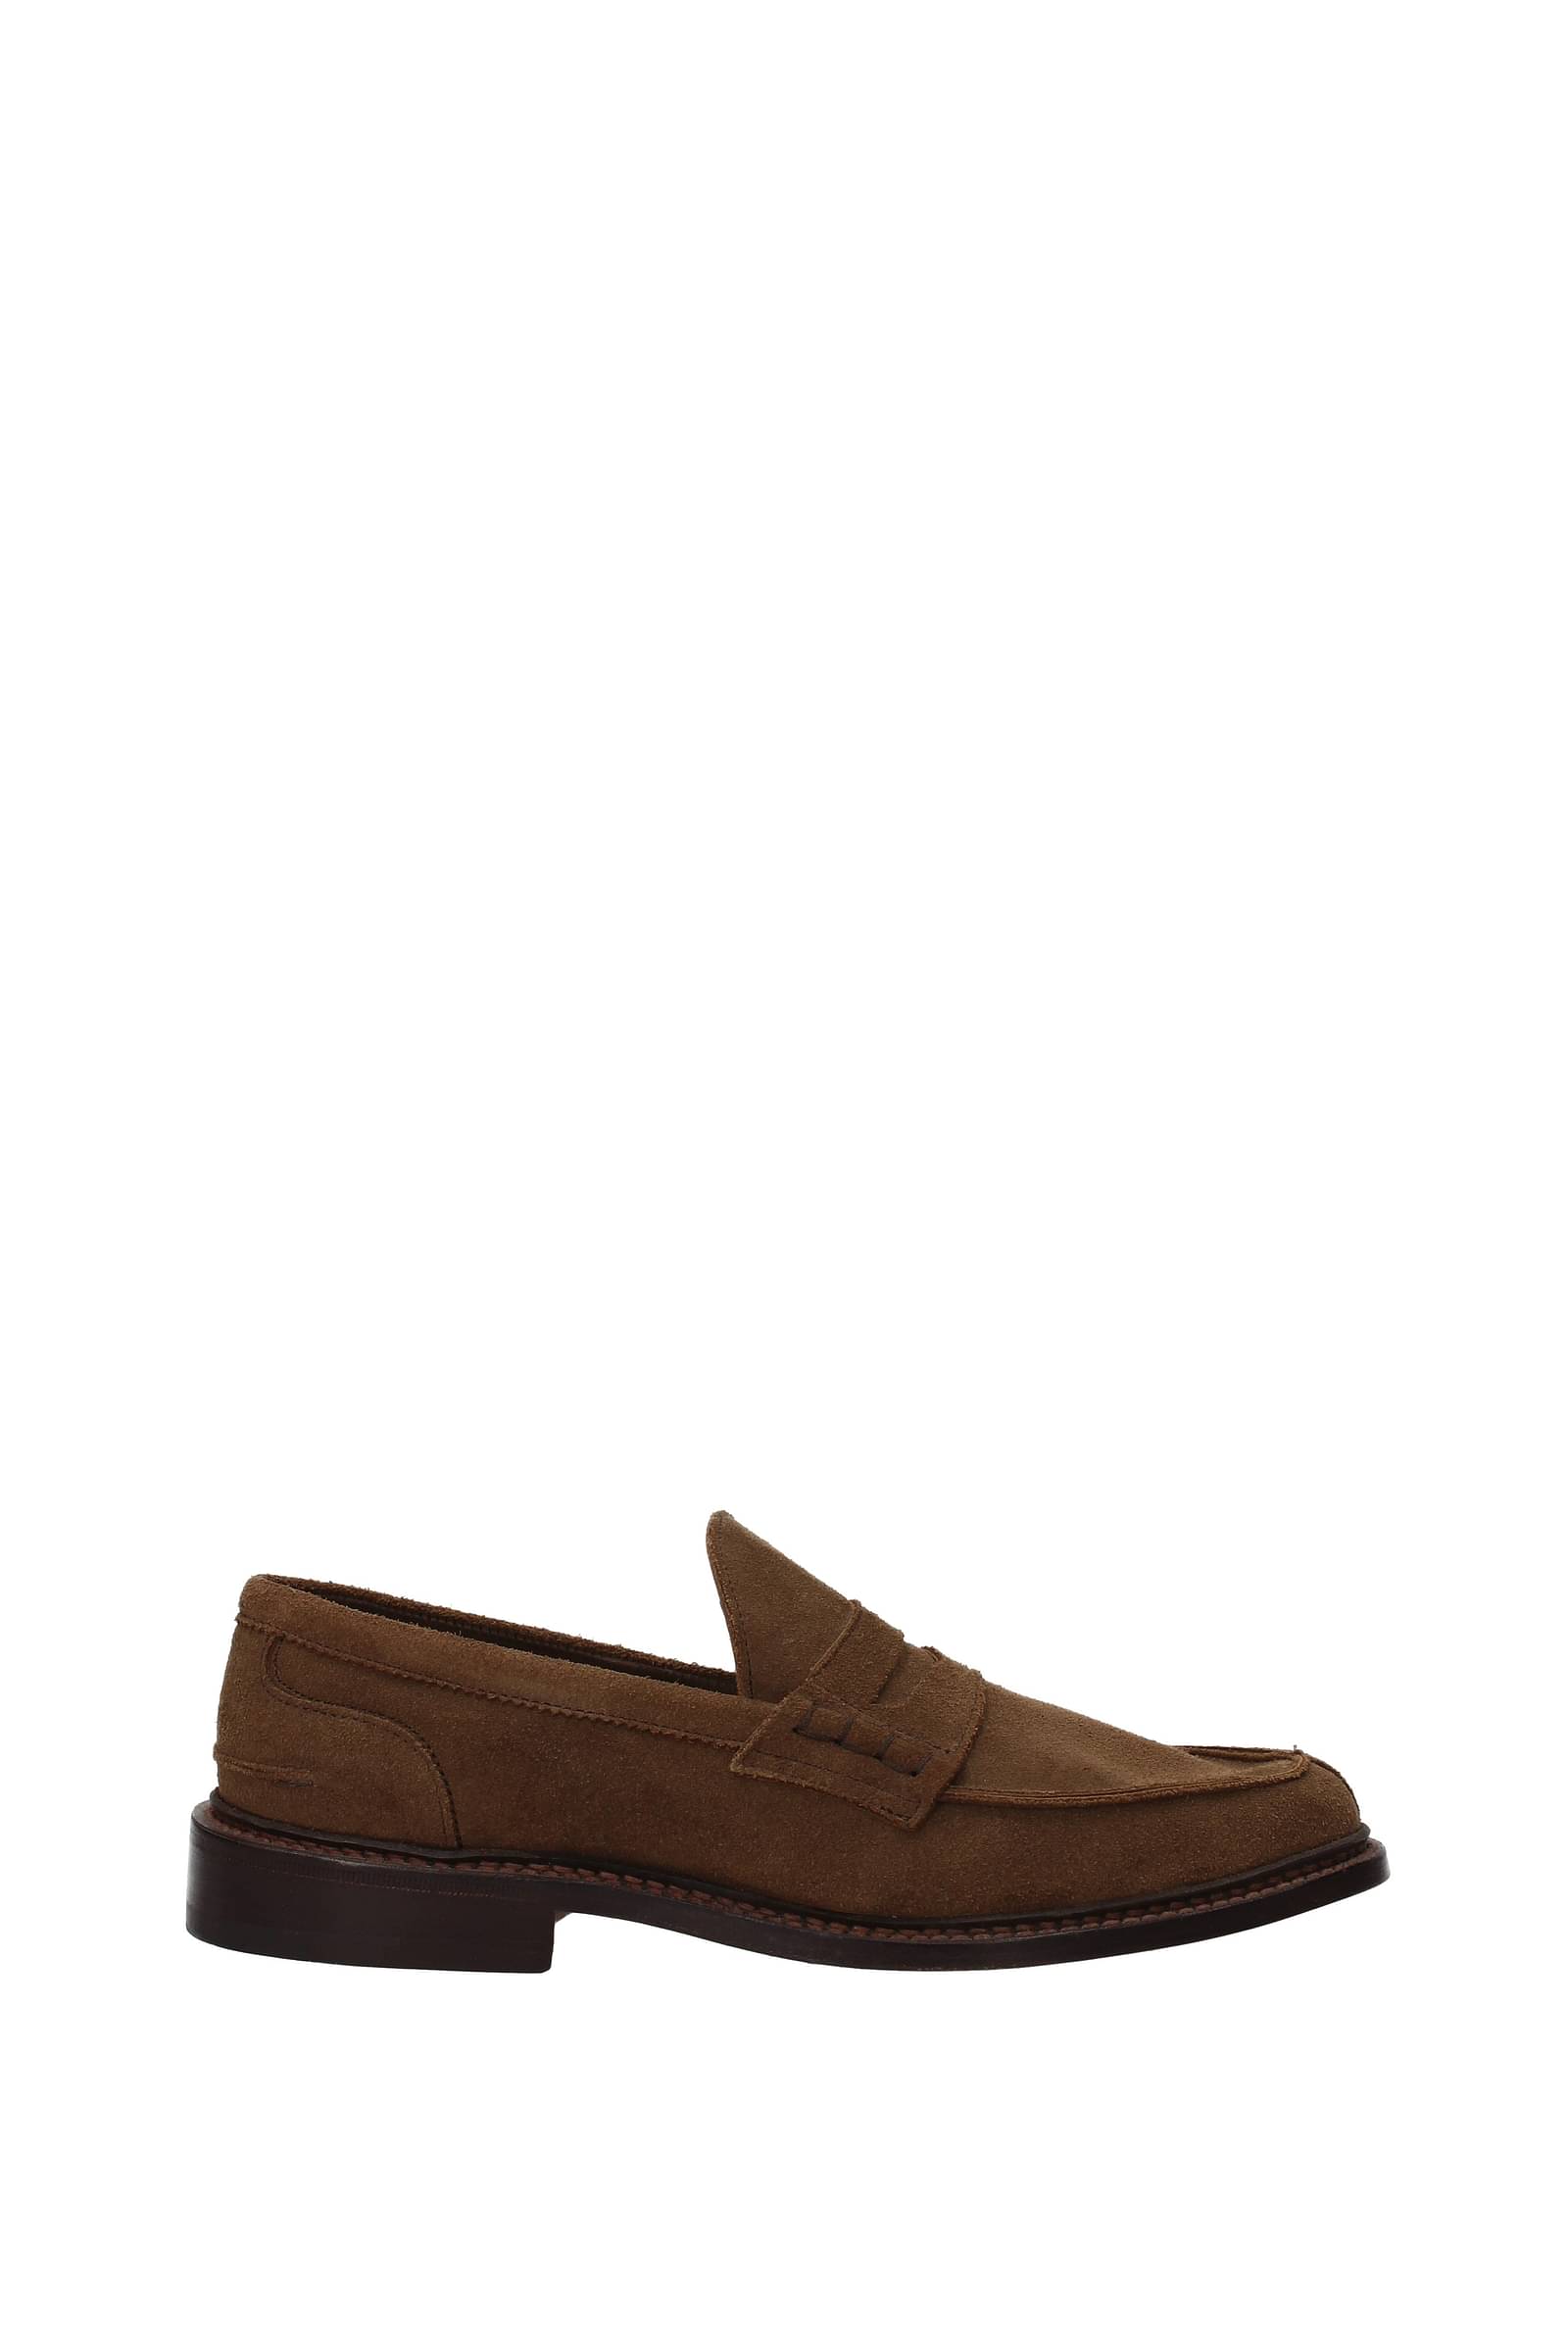 Mocassins TRICKERS 41 marron Homme Chaussures Trickers Homme Mocassins Trickers Homme Mocassins Trickers Homme 